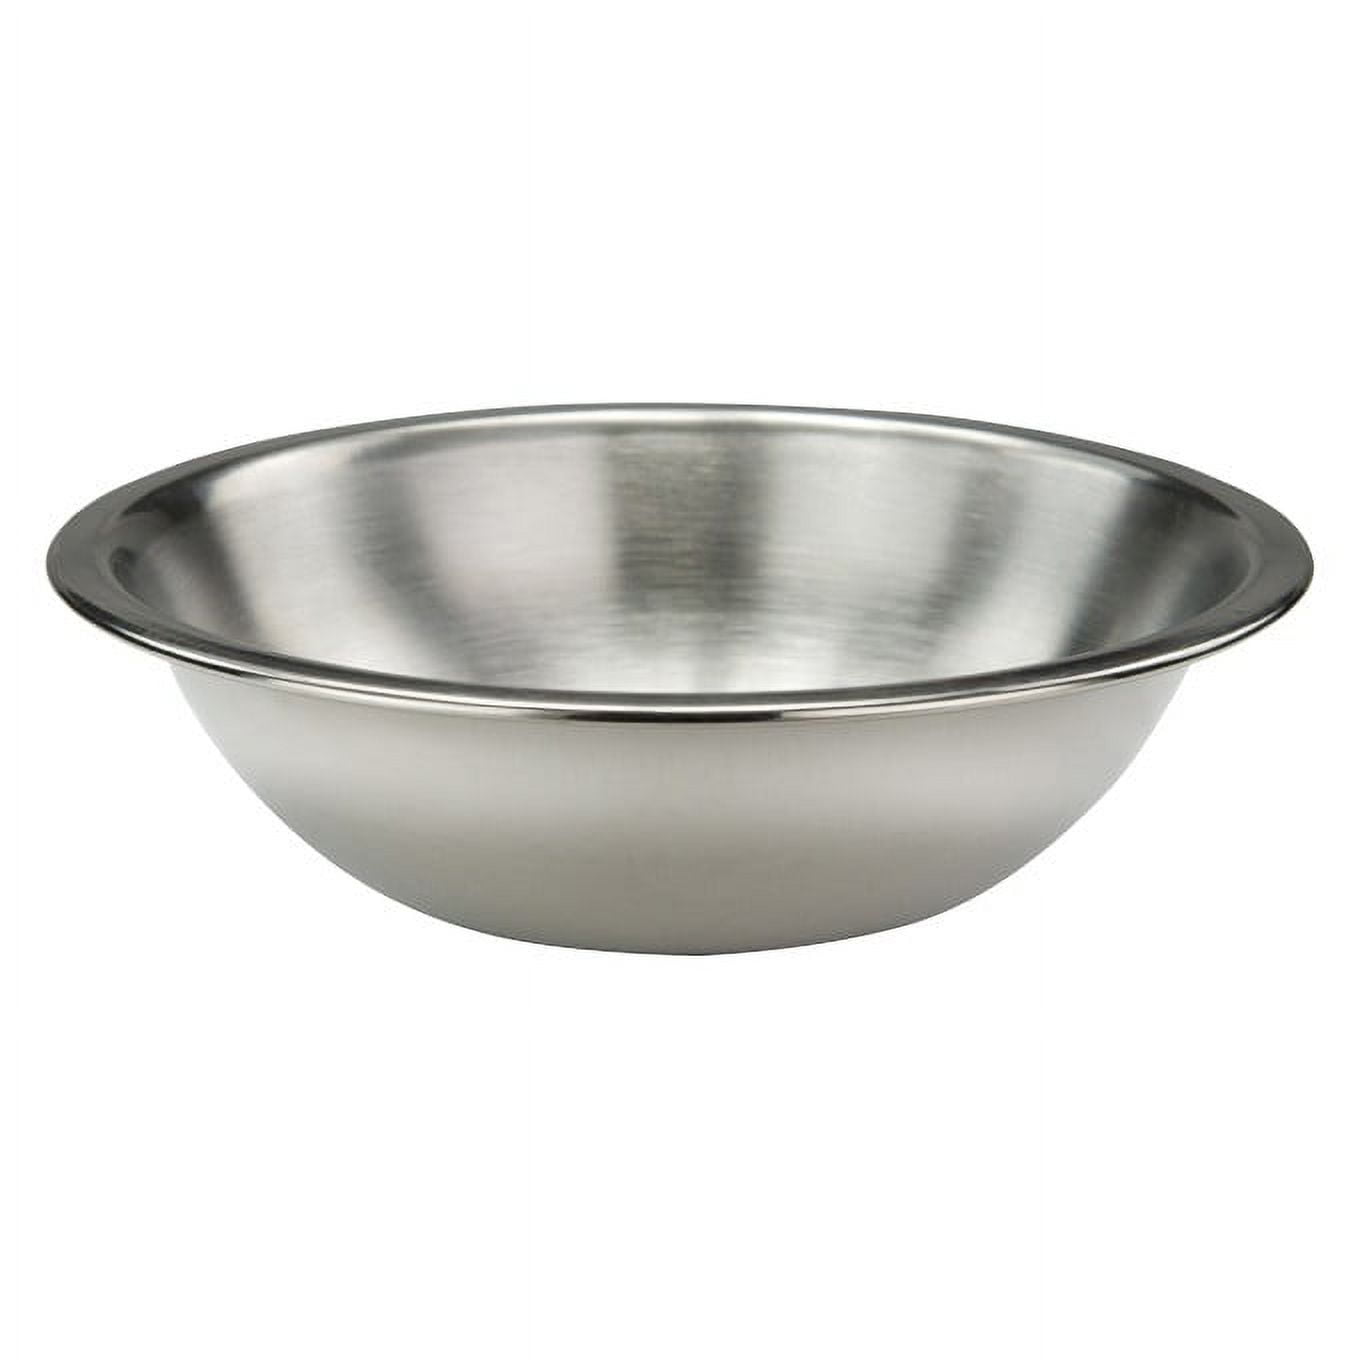 Winco Heavy-Duty Mixing Bowl, 16-Quart, Stainless Steel